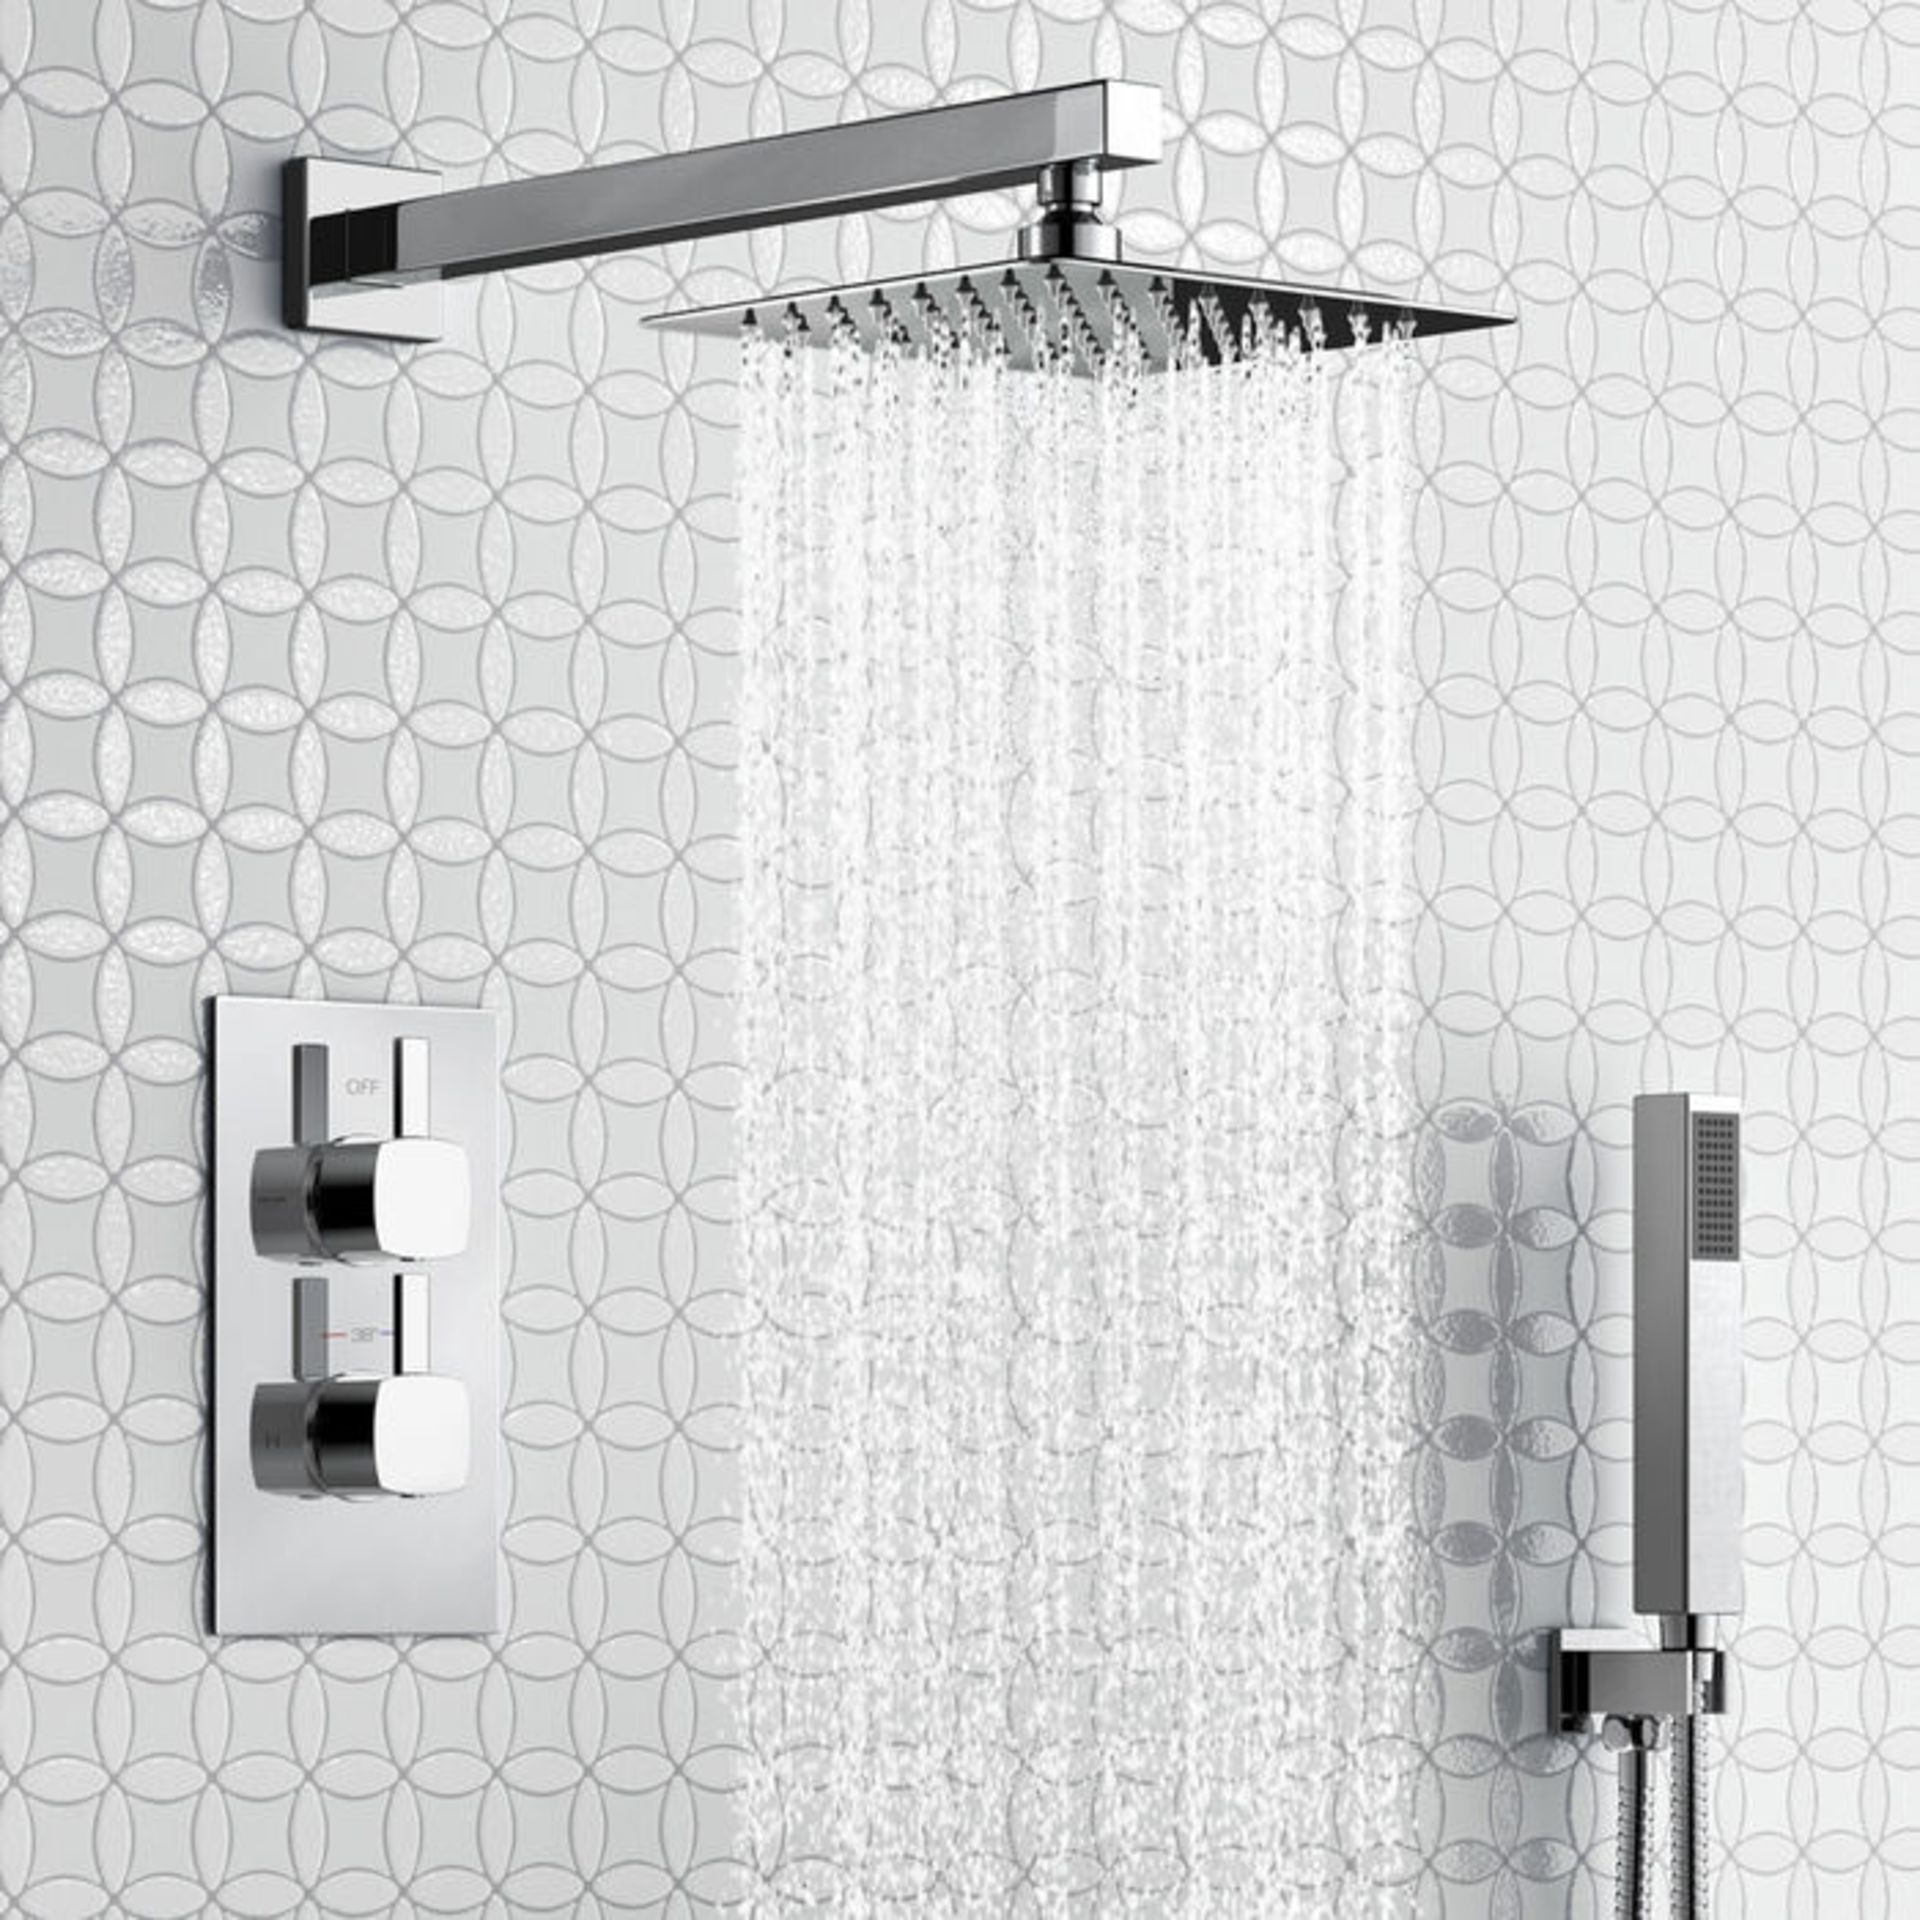 (H37) Square Concealed Thermostatic Mixer Shower Kit & Medium Head. Family friendly detachable